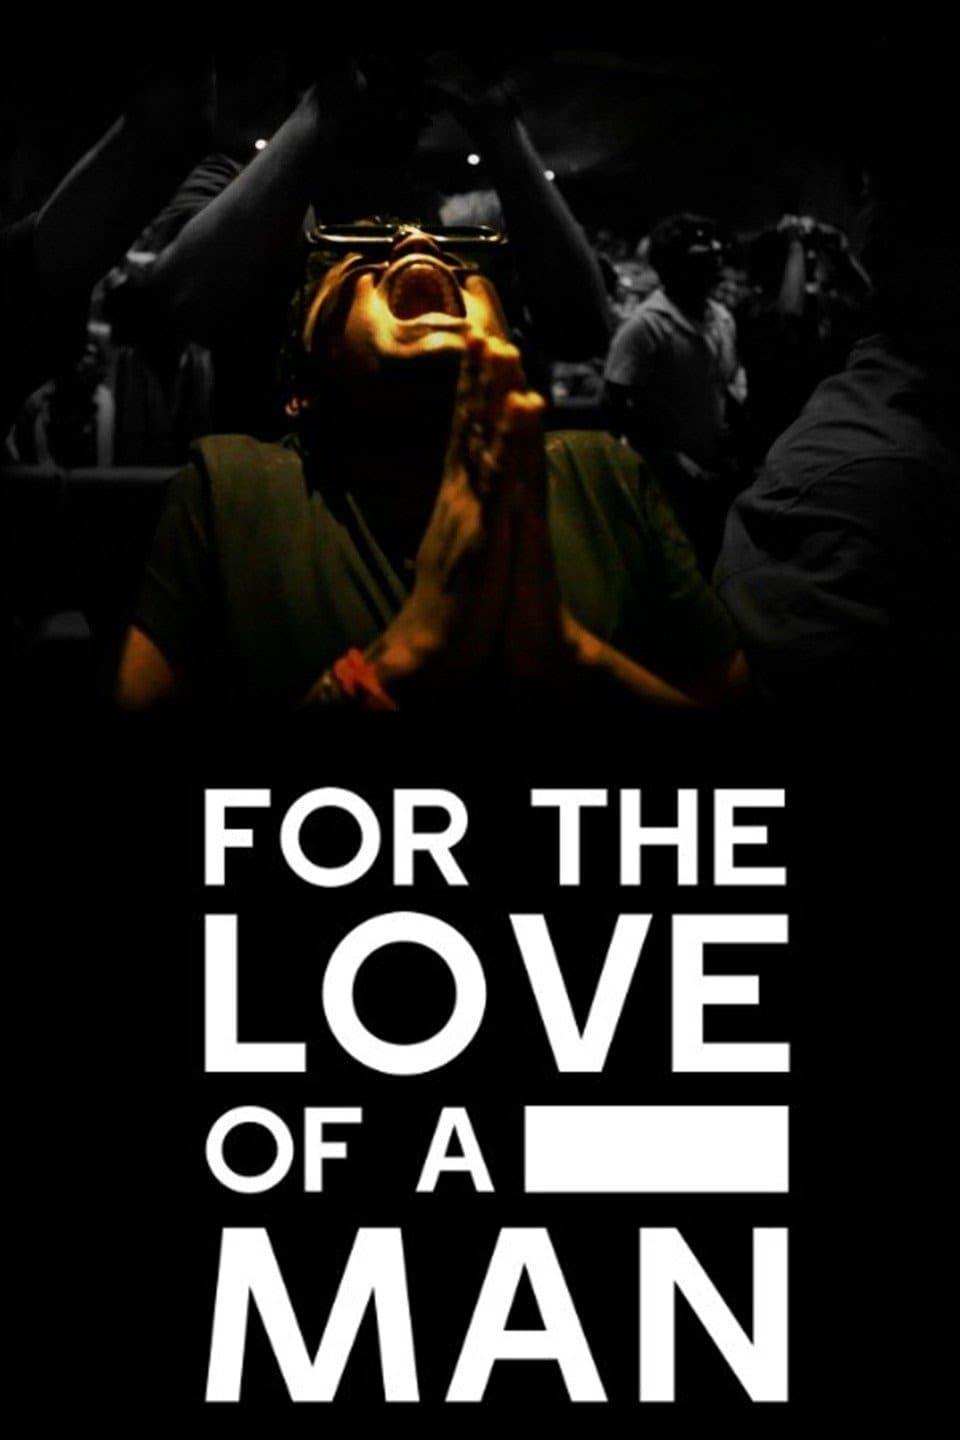 For the Love of a Man poster